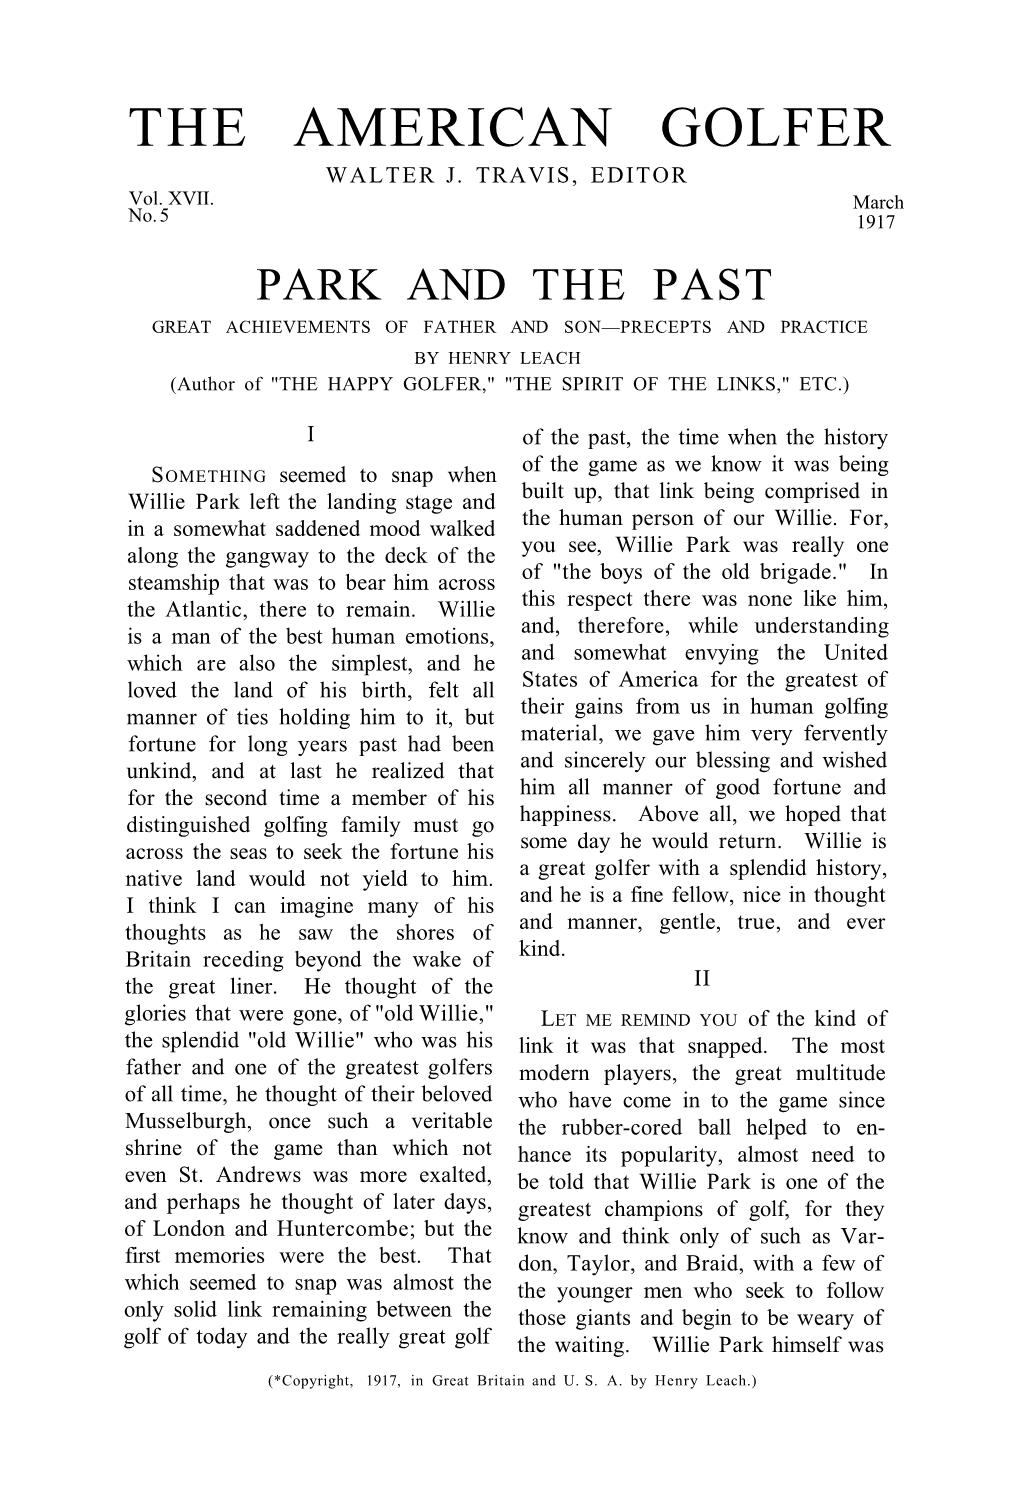 PARK and the PAST GREAT ACHIEVEMENTS of FATHER and SON—PRECEPTS and PRACTICE by HENRY LEACH (Author of "THE HAPPY GOLFER," "THE SPIRIT of the LINKS," ETC.)